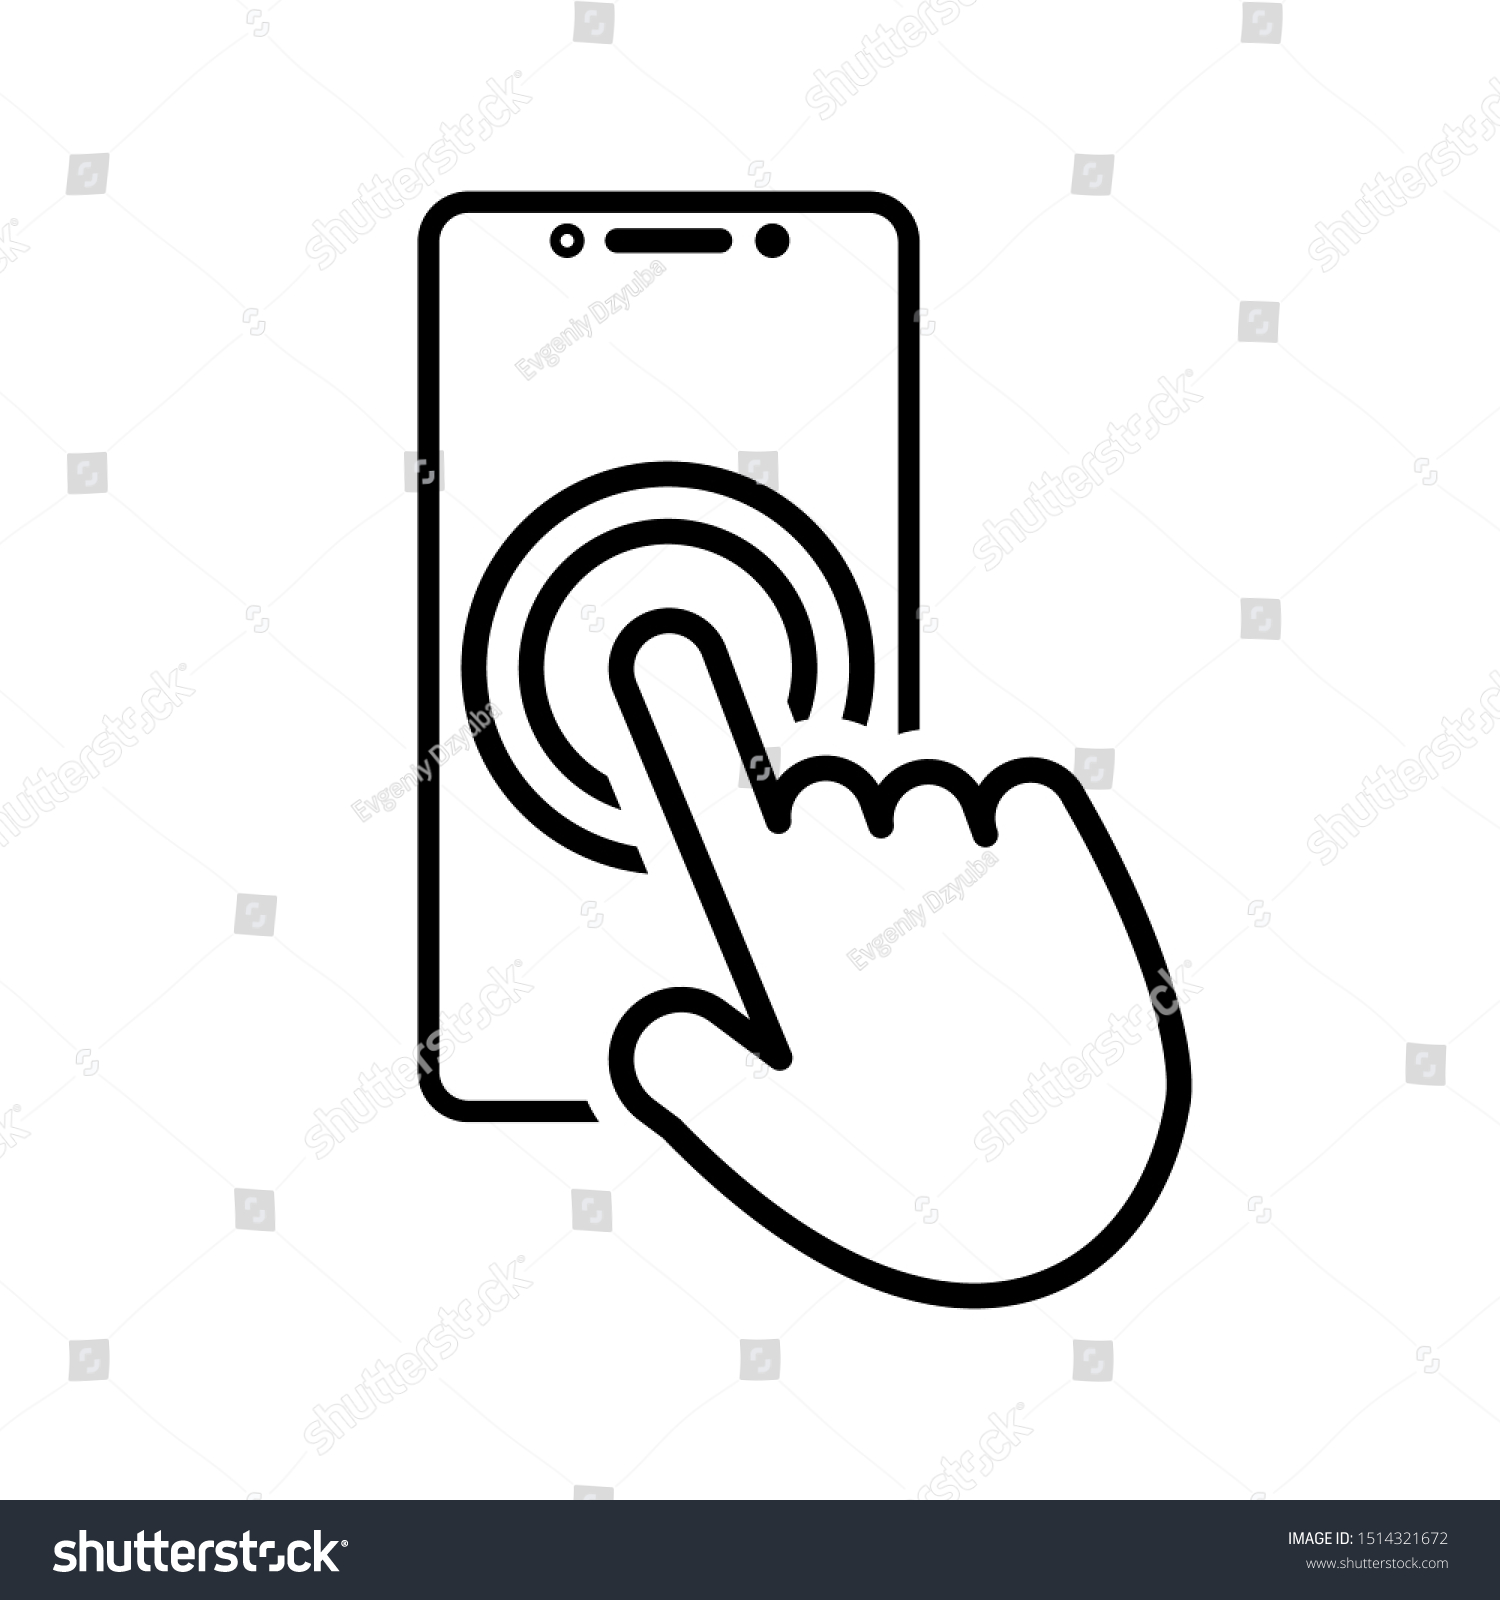 Touch smartphone icon with hand for your projects. Vector illustration. #1514321672